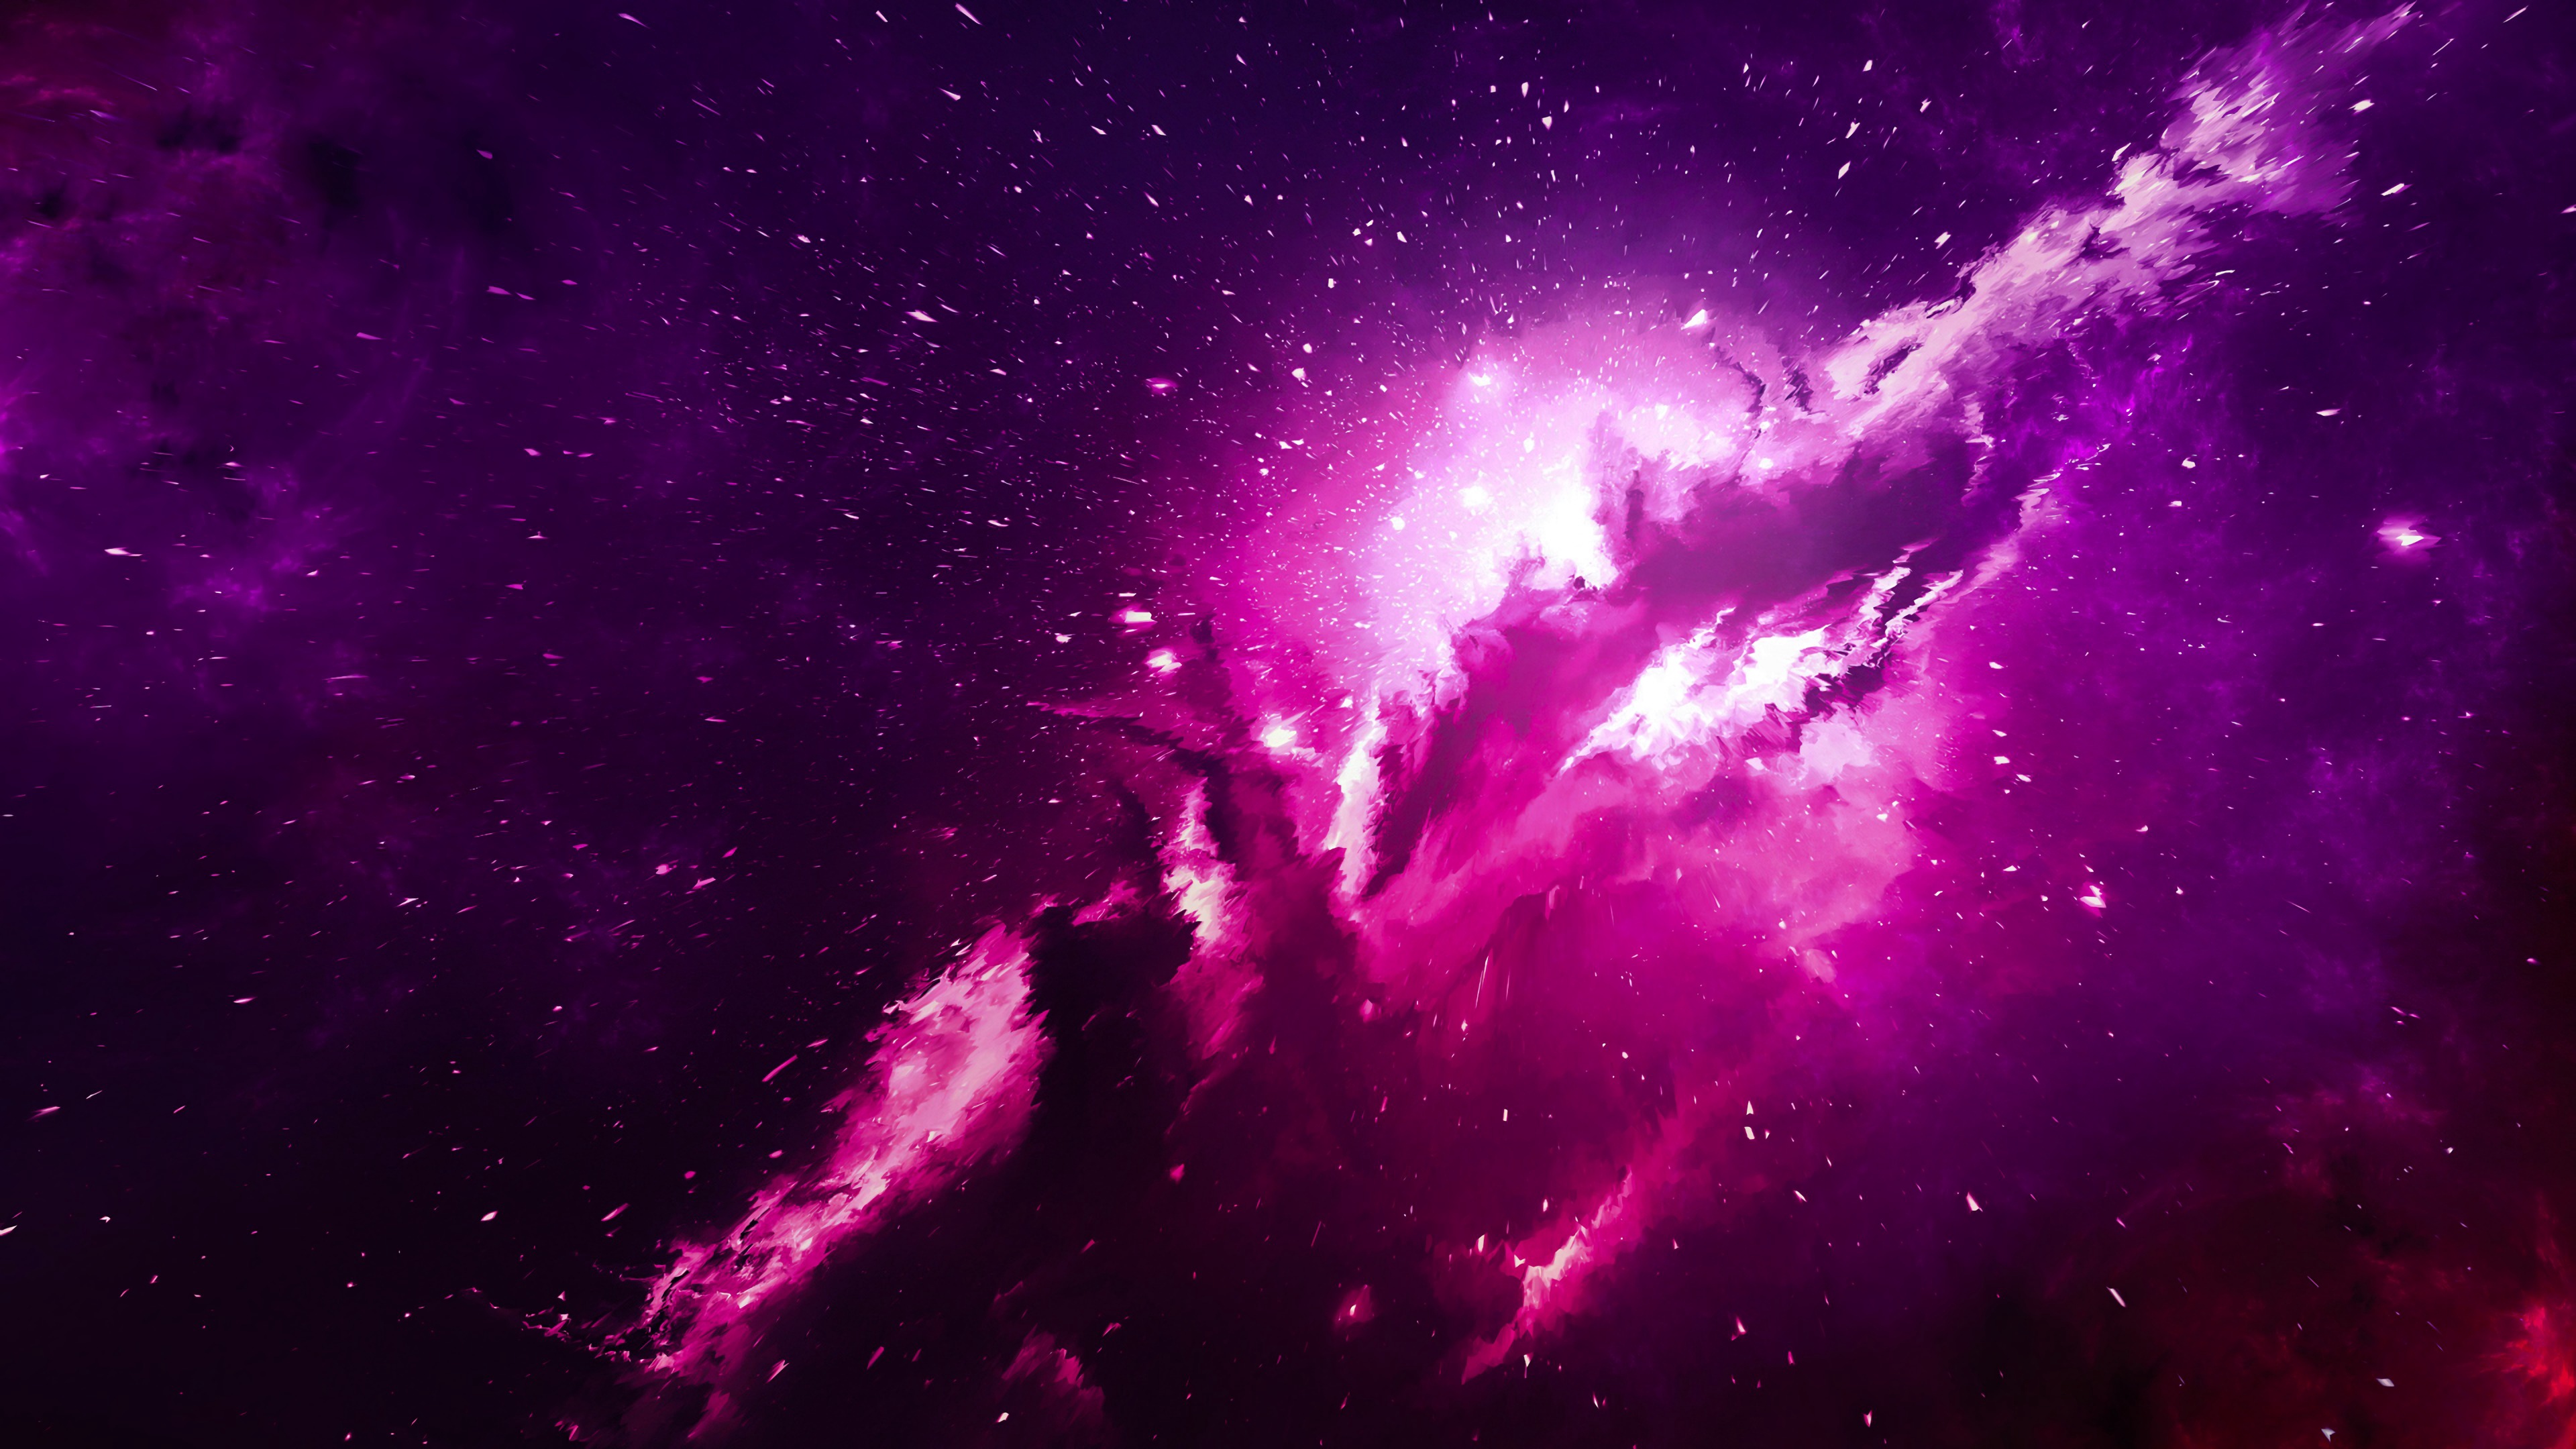 Find the best galaxy wallpaper for your phone and desktop computer